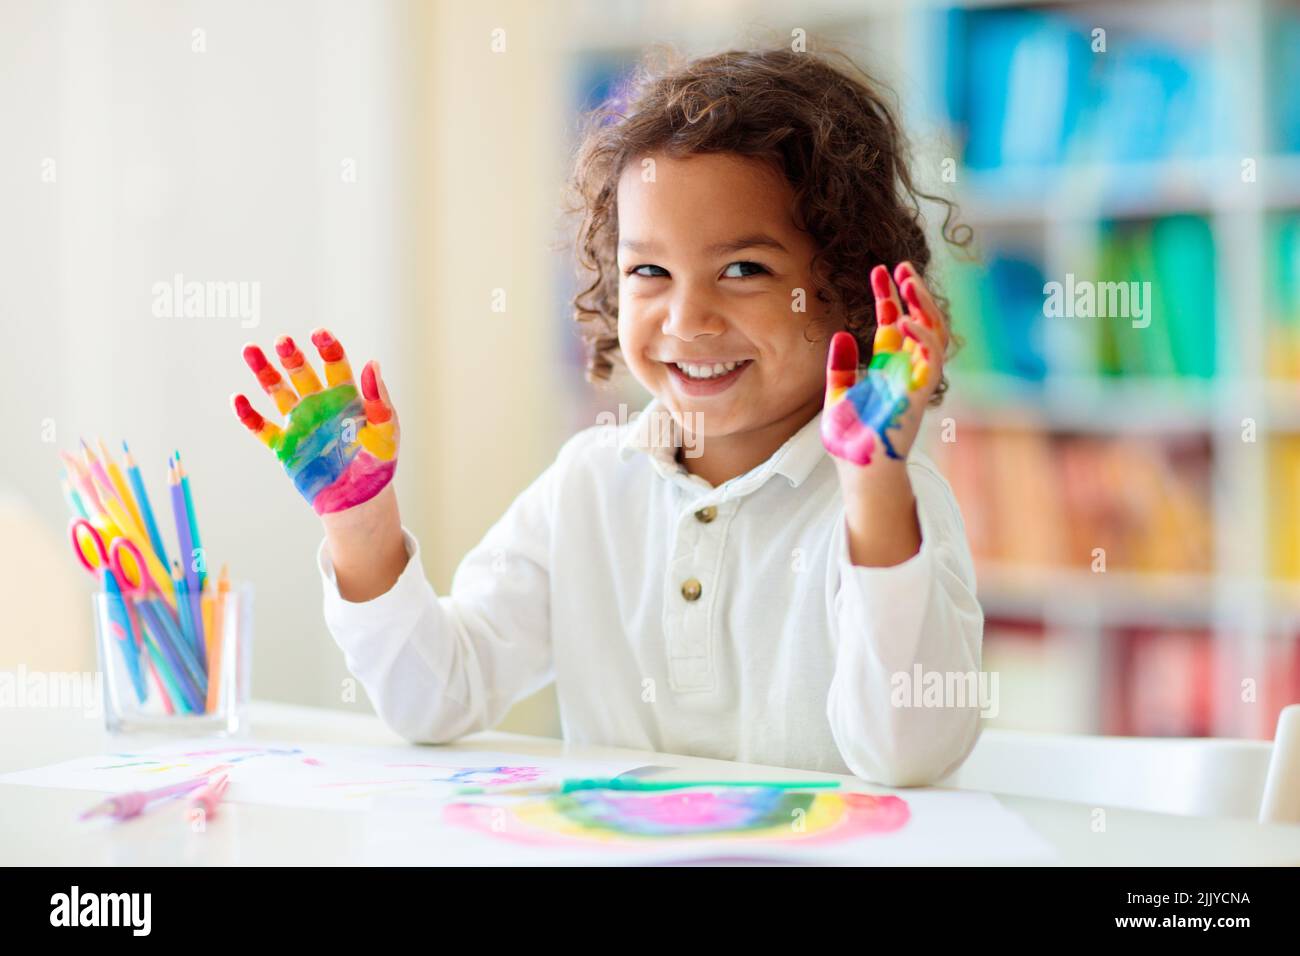 Child drawing rainbow. Paint on hands. Remote learning and online school art homework from home. Arts and crafts for kids. Stock Photo